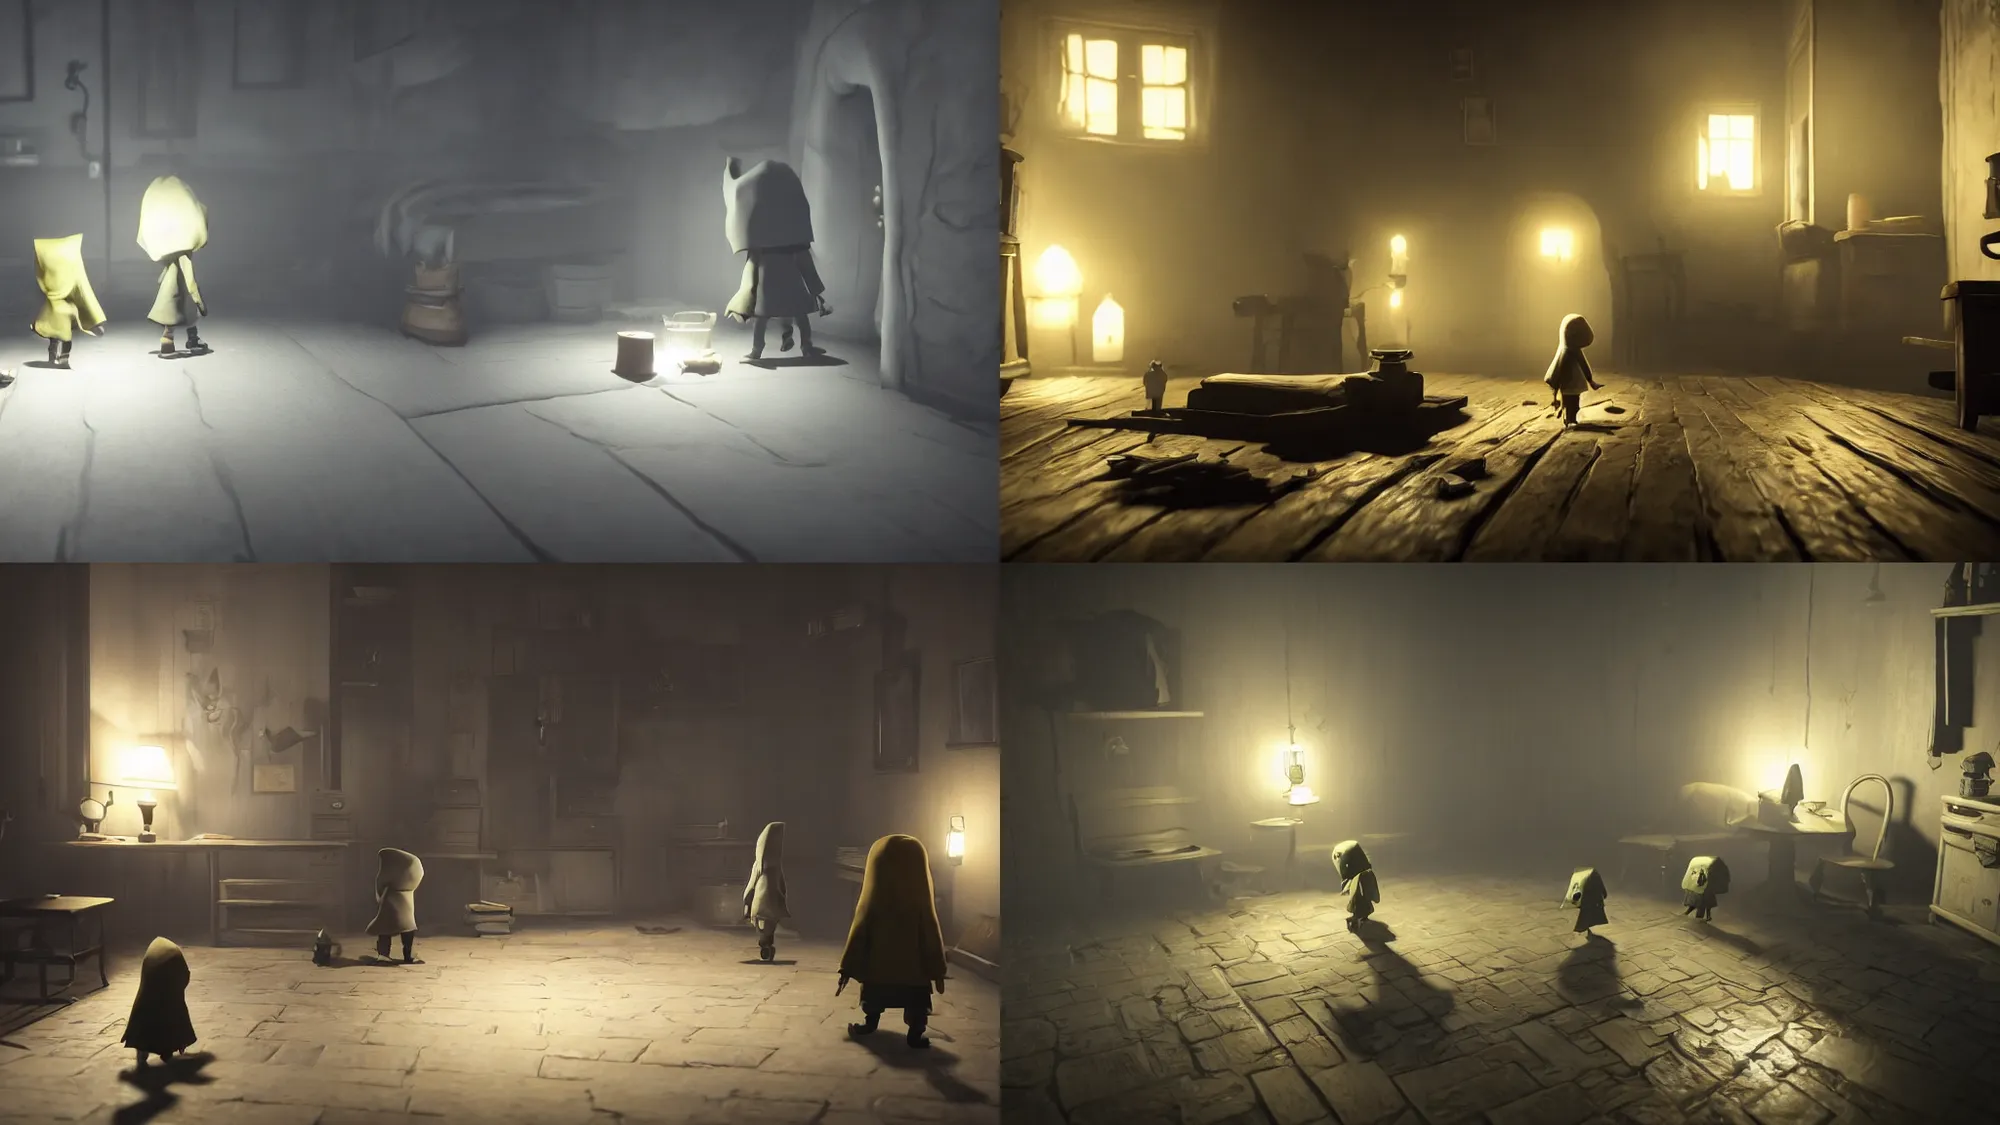 Image similar to Screenshots of game named Little nightmares, mystery scary horror, high resolution gameplay, 8k hdr render, highly detailed dark 3d artwork